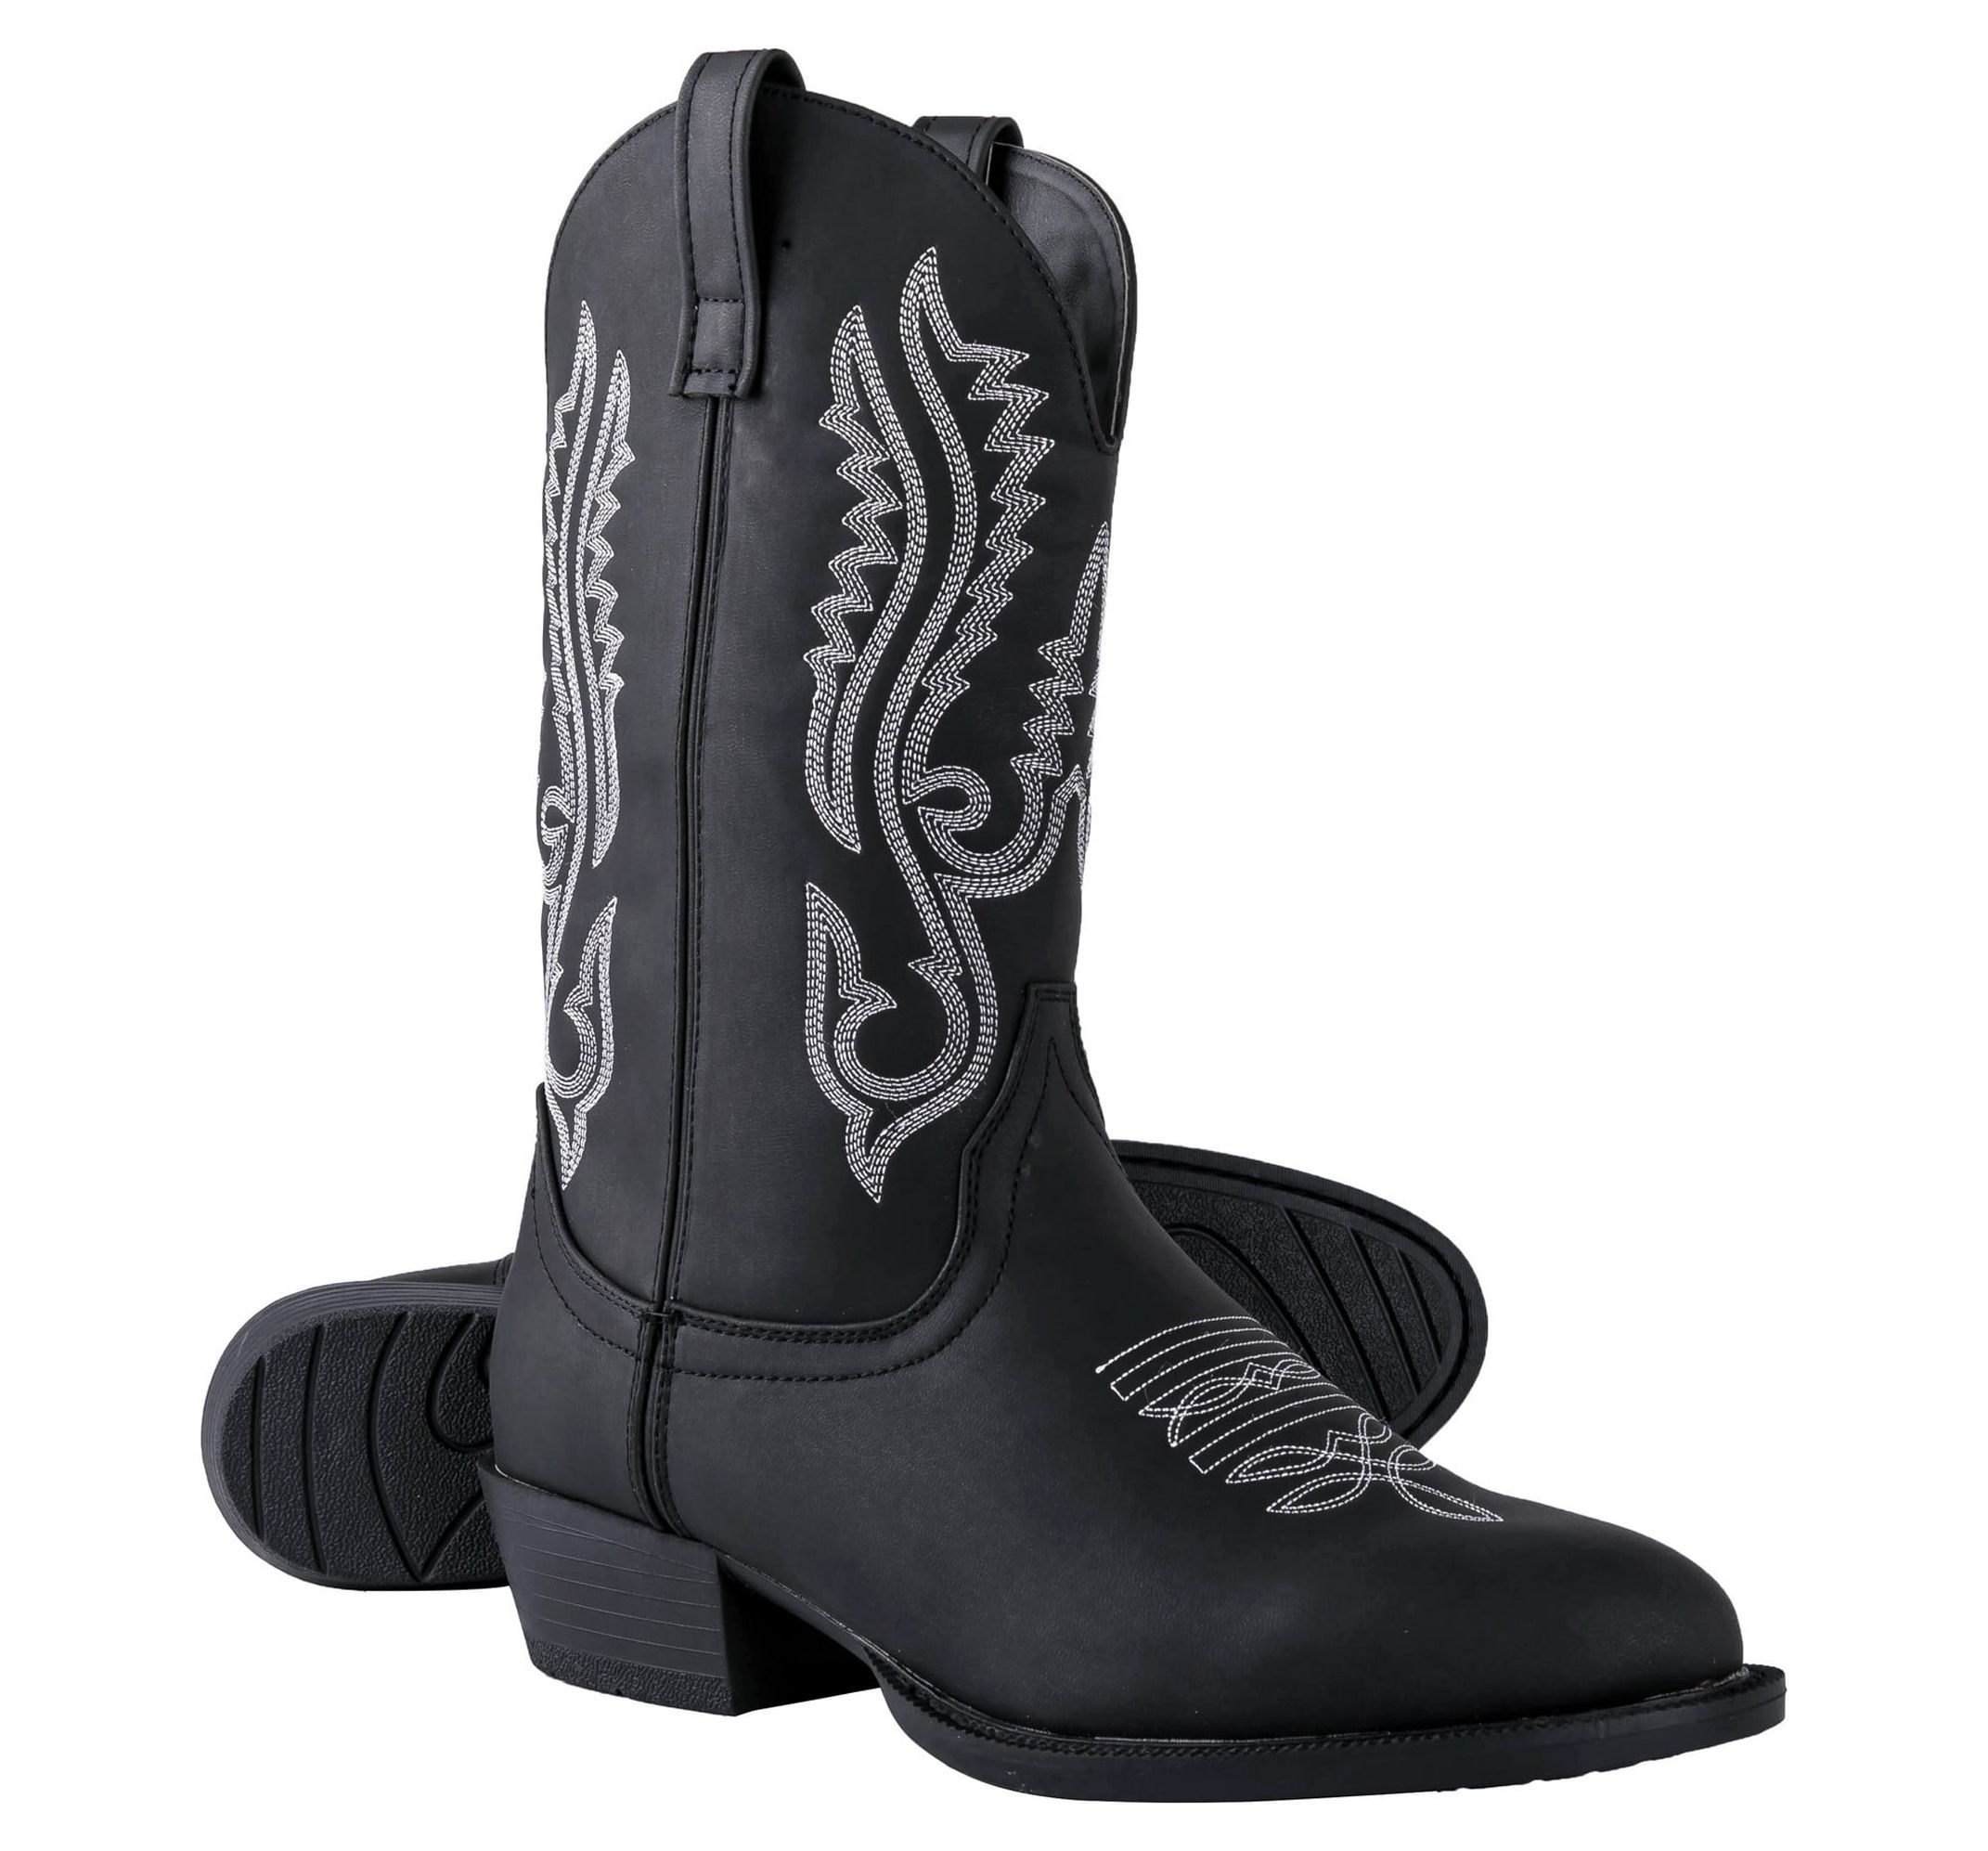 Canyon Trails Mens Classic Durable Round Toe Embroidered Western Rodeo Cowboy Boots - image 1 of 7